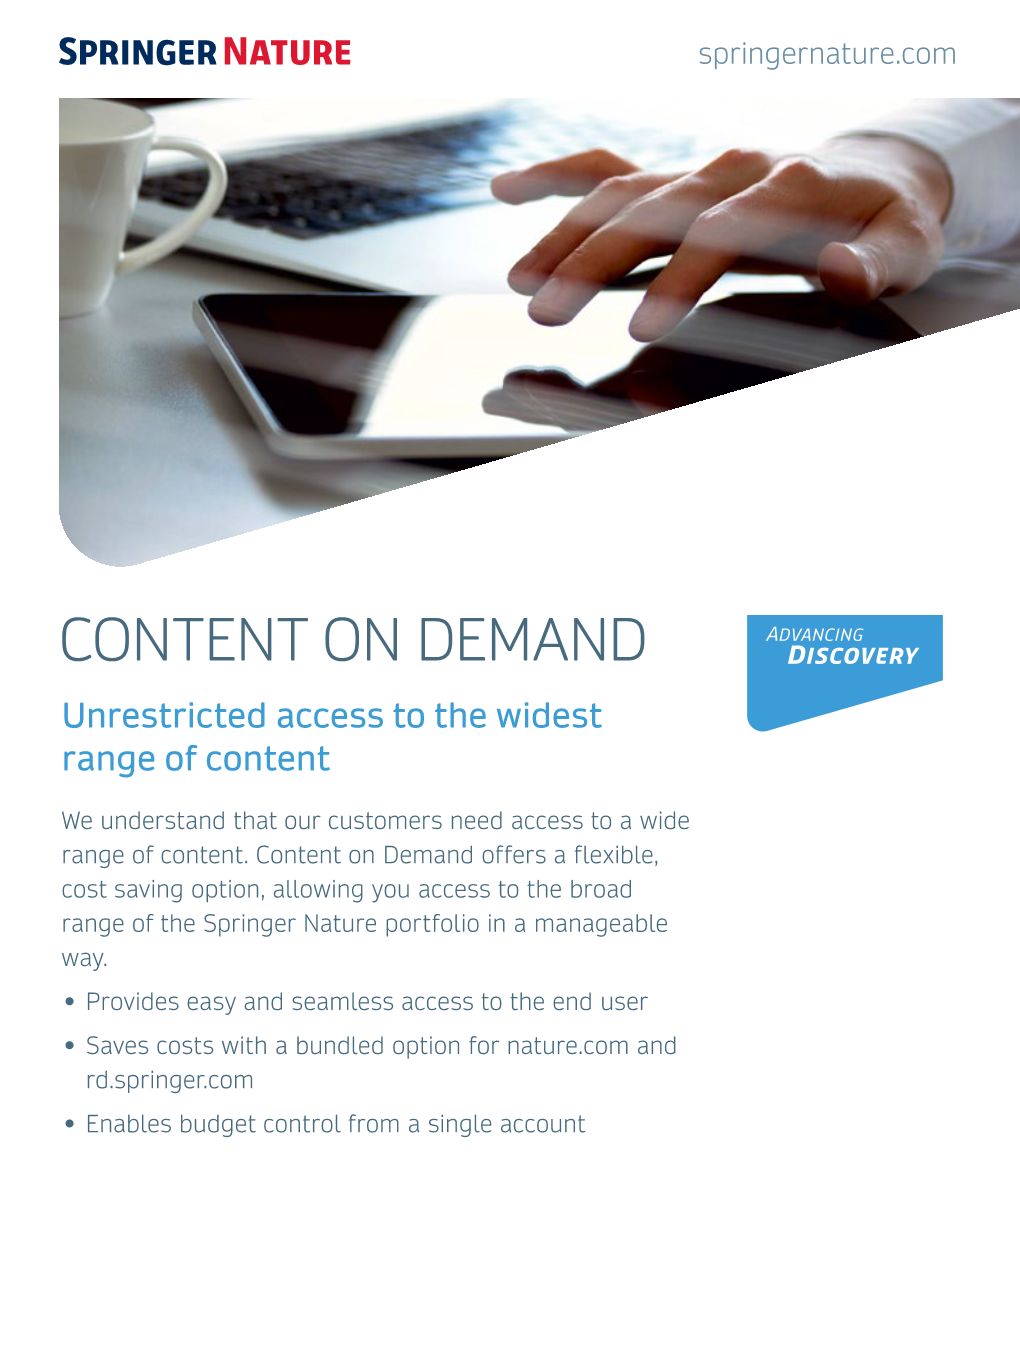 CONTENT on DEMAND Unrestricted Access to the Widest Range of Content